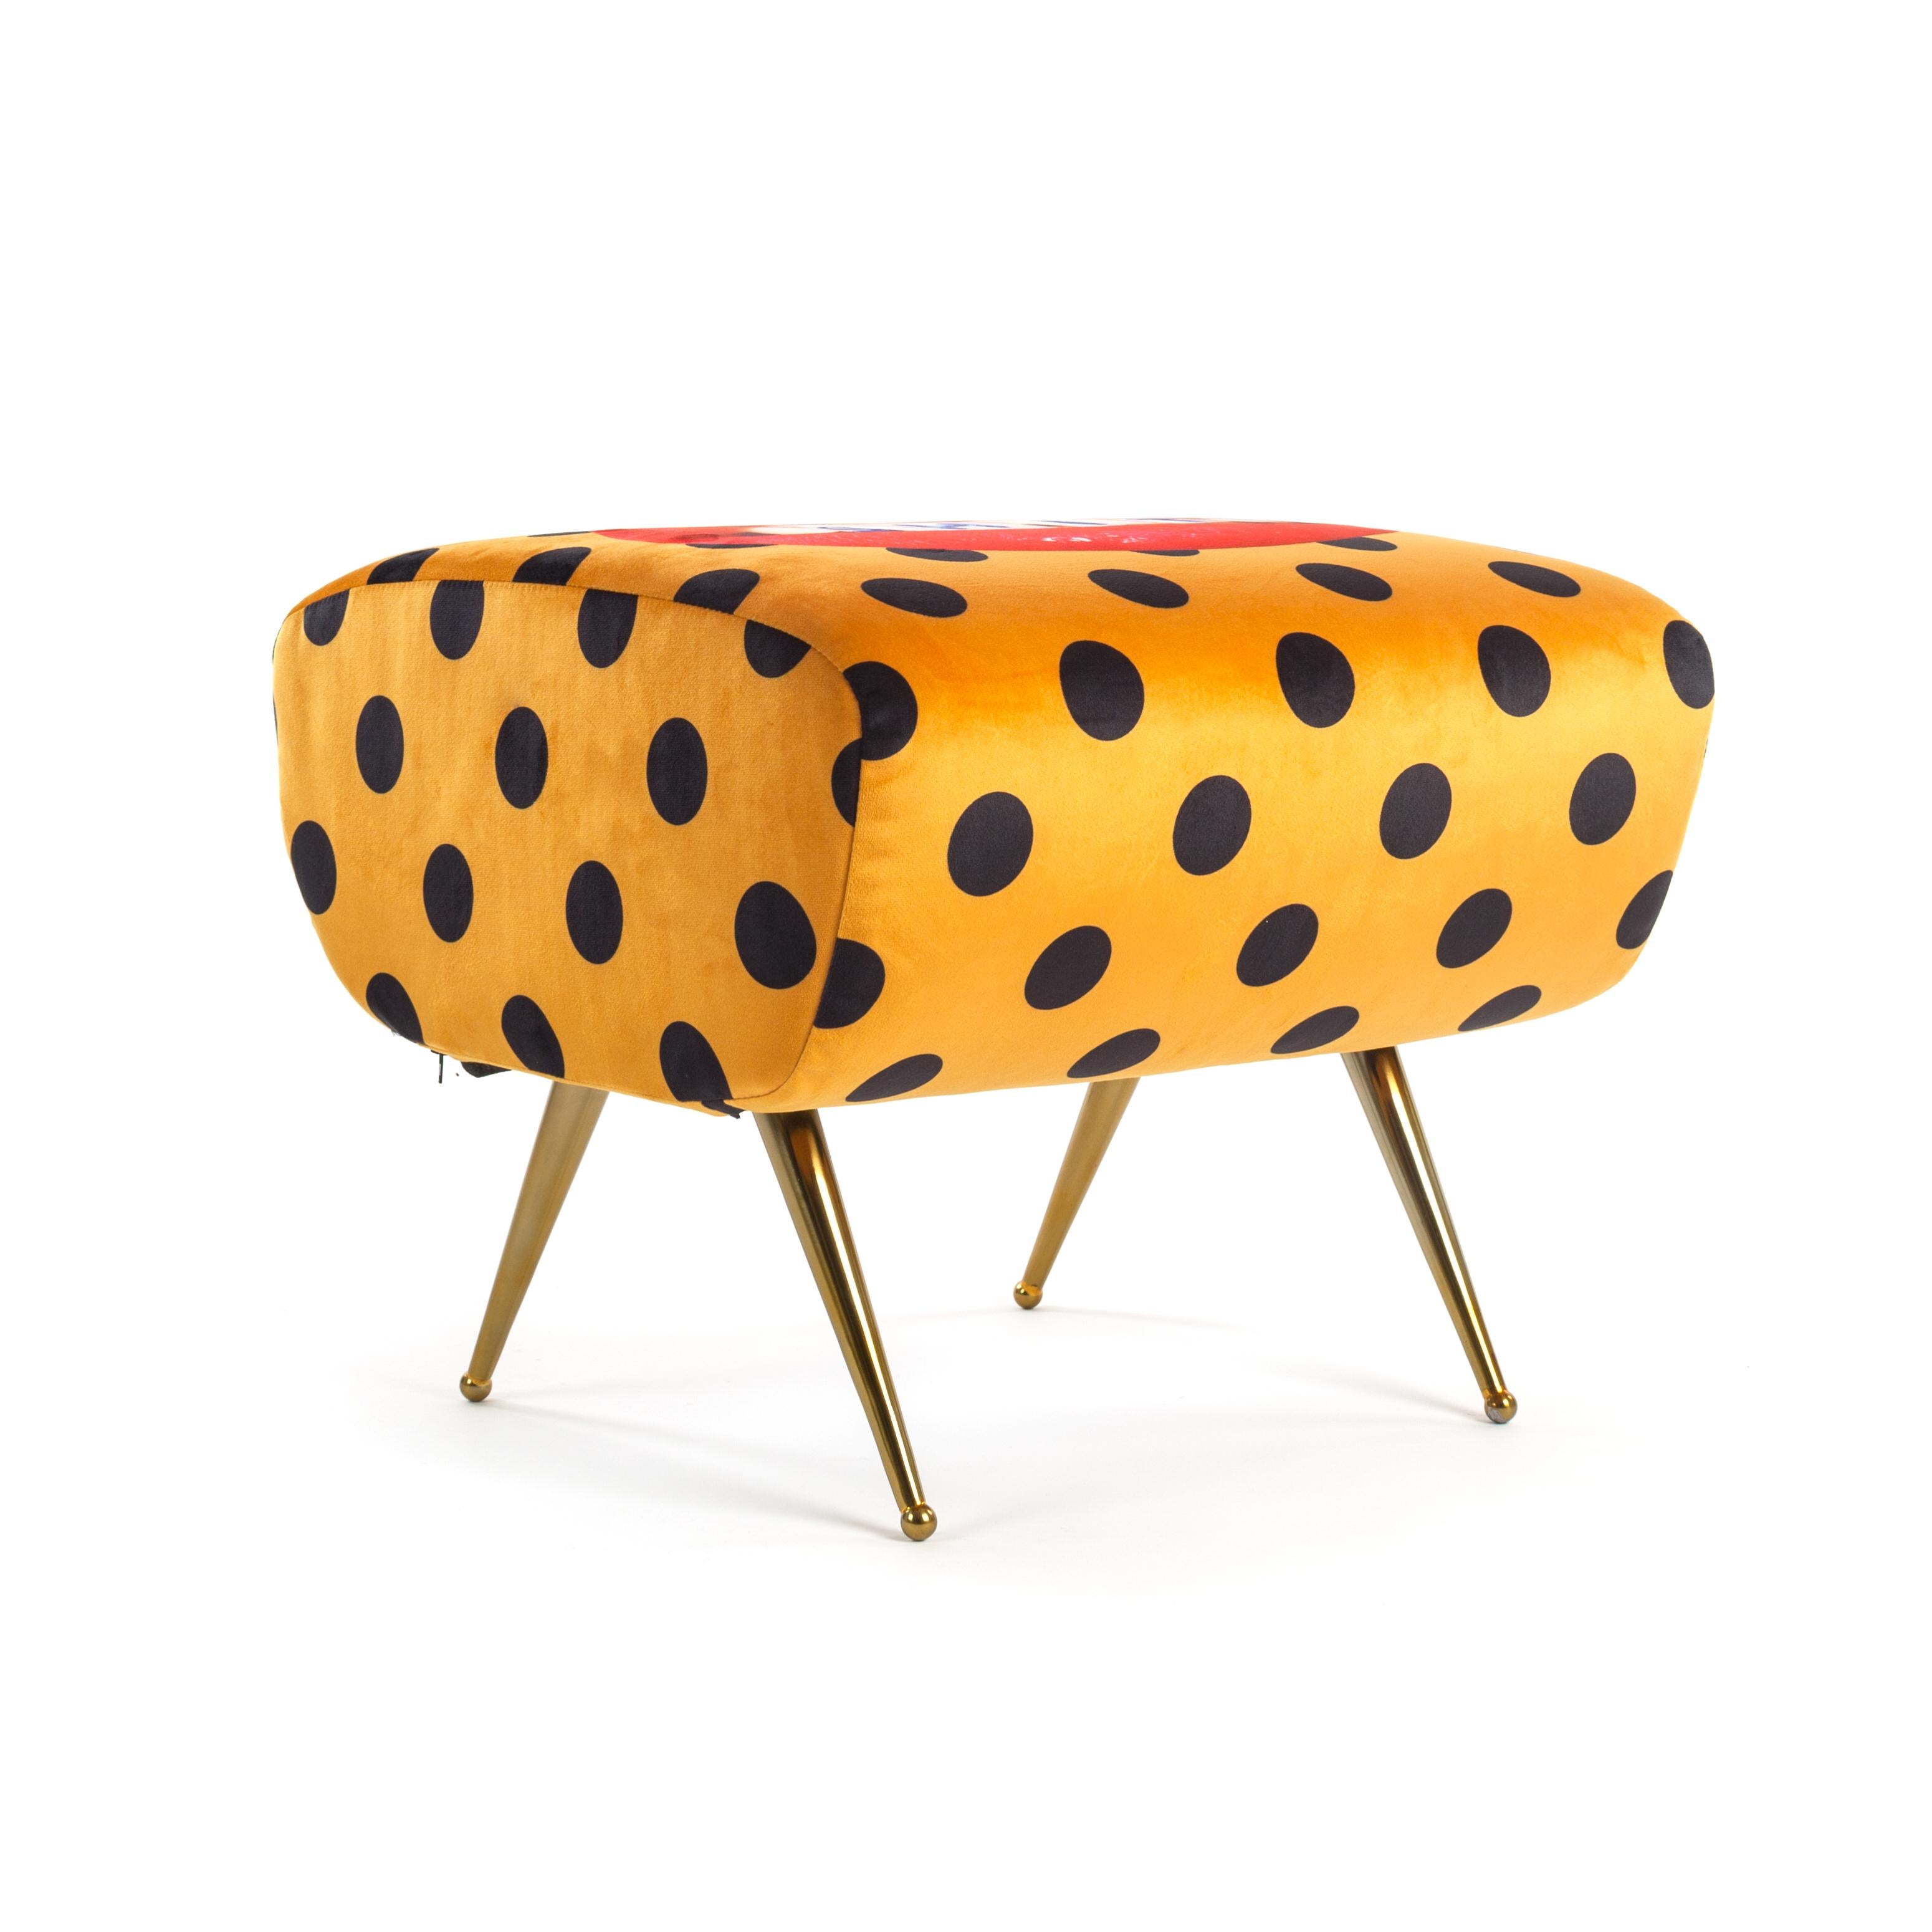 Pouf by Toiletpaper.

- Size: cm 51 × 46, H. 42
- Material: Fabrics in polyester, frame in wood with polyurethane padding, metal.
 